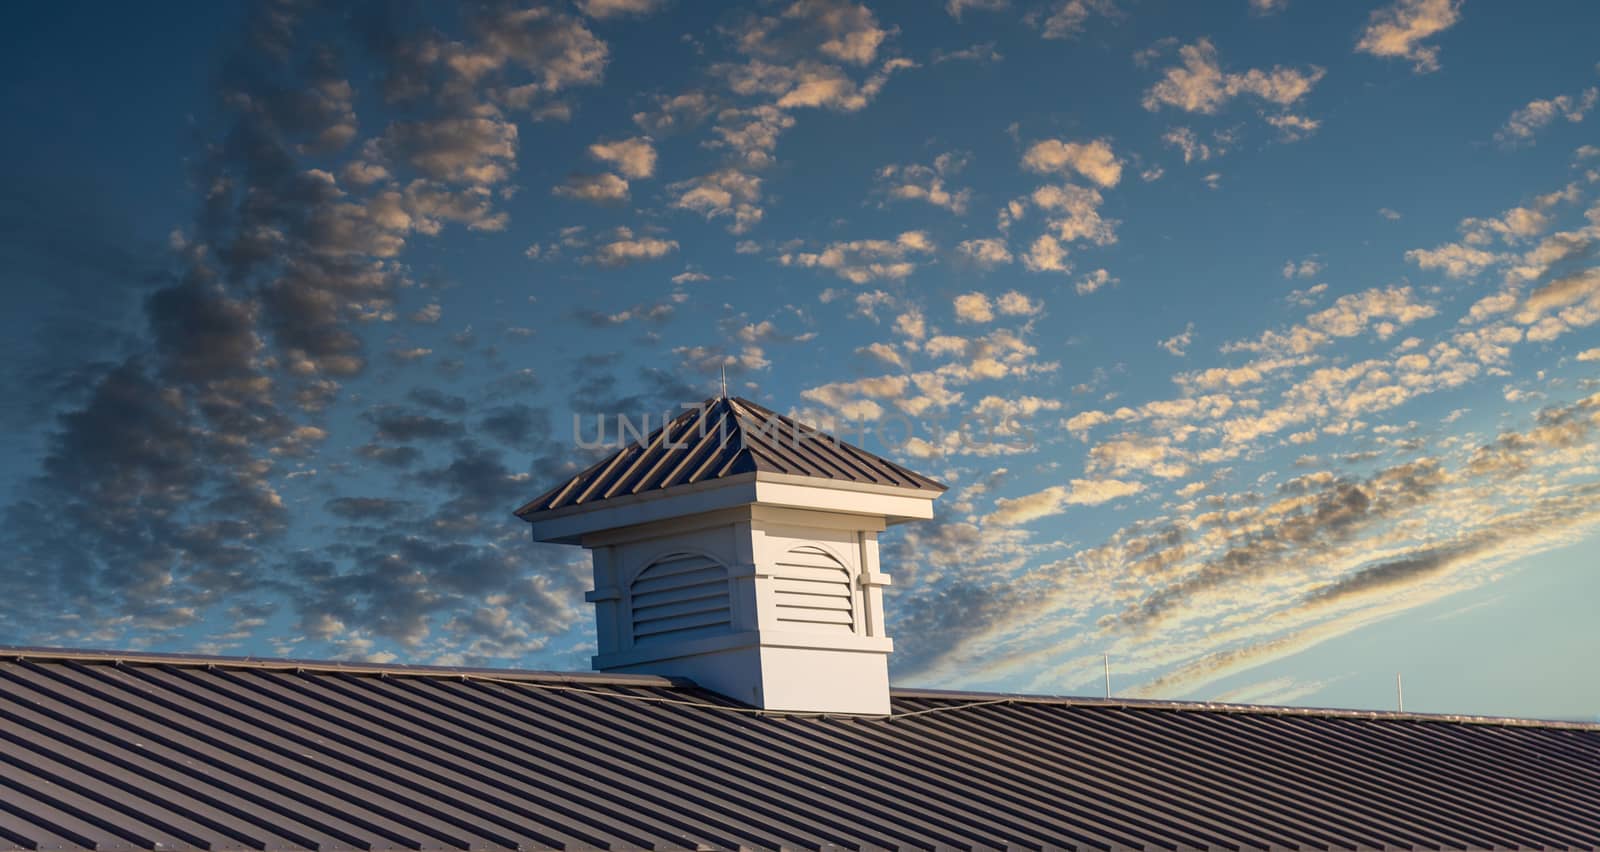 Wood cupola on an old pier roof under blue sky